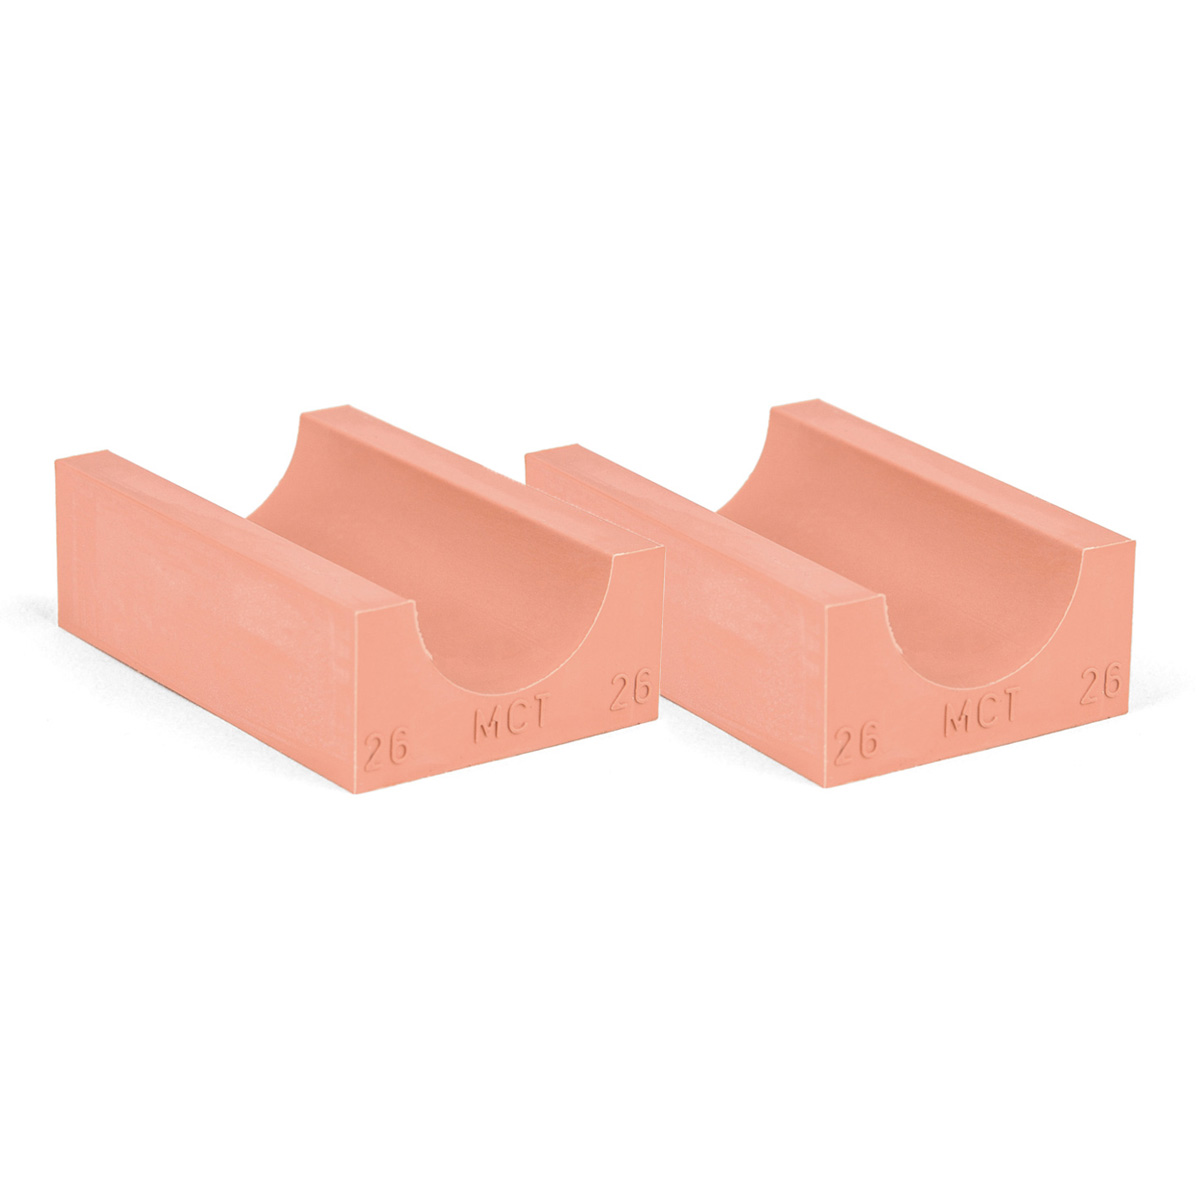 40-26*2 Set of 2 half insert block lycron, 40-26 for cable/pipe diam. 25.5-27.5mm